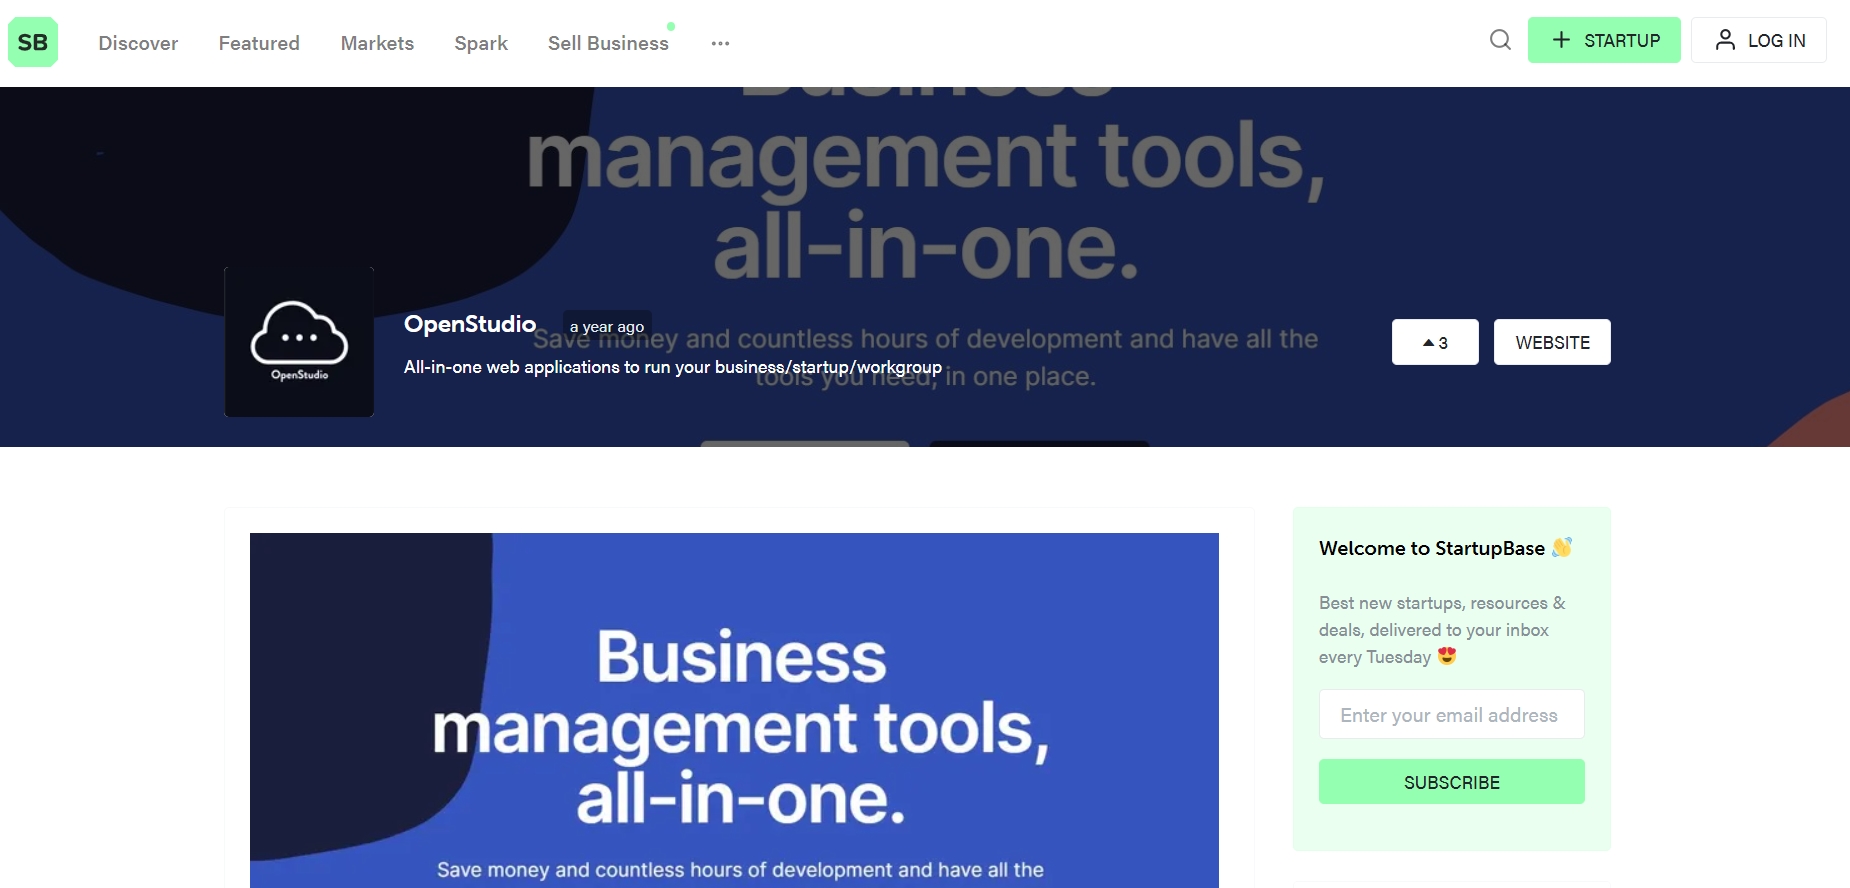 OpenStudio - All-in-one web applications to run your business/startup/workgroup